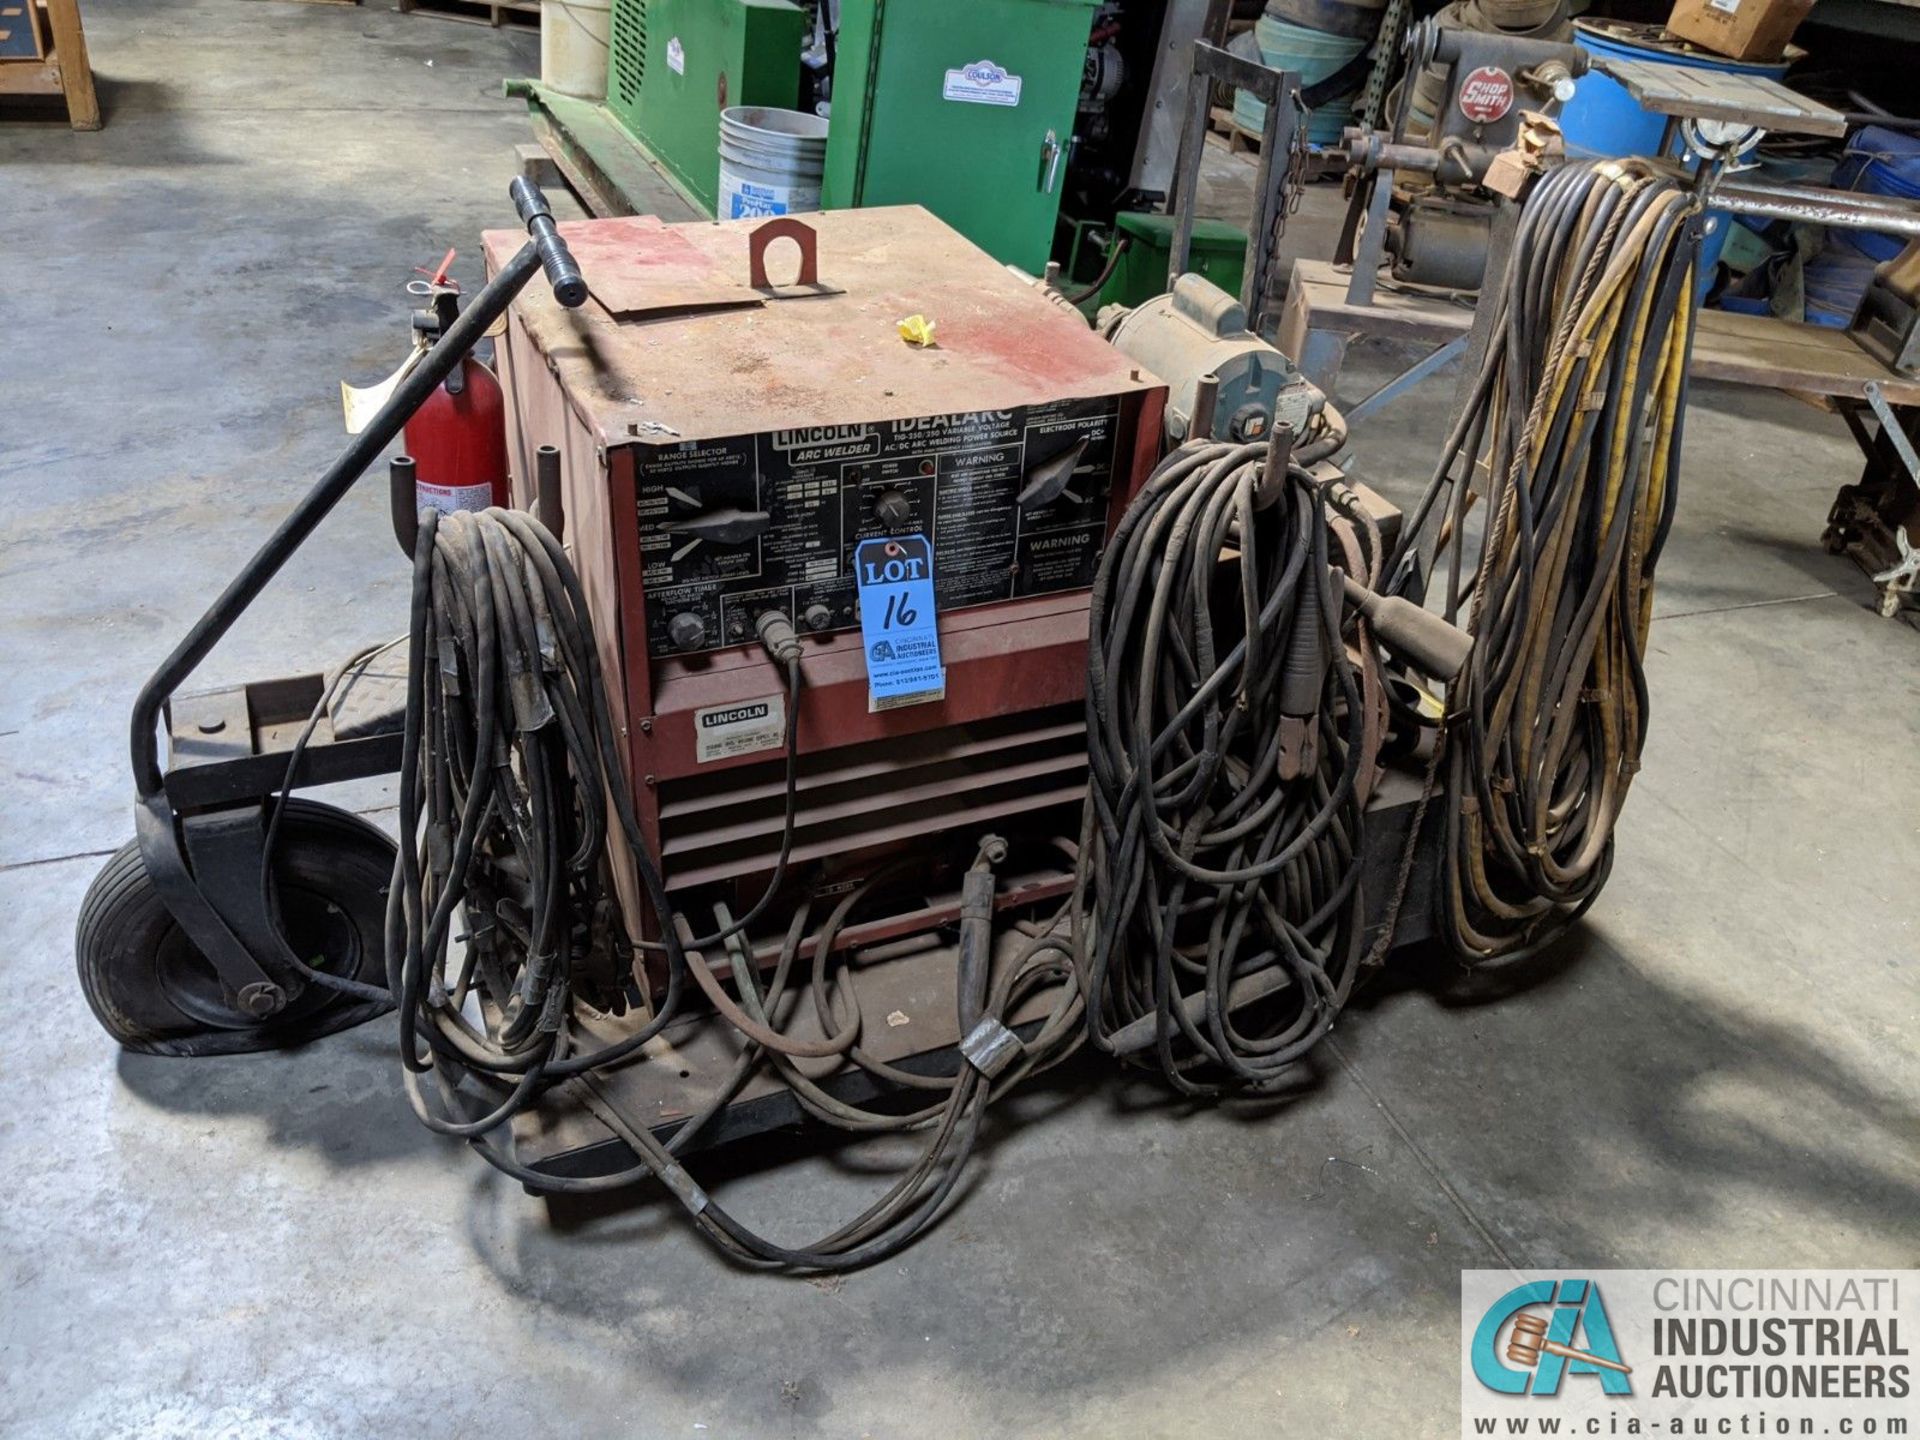 250 AMP LINCOLN MODEL TIG 250/250 WELDER; S/N 533770, MOUNTED ON CART W/ LEADS & AIRCO CHILLER (8635